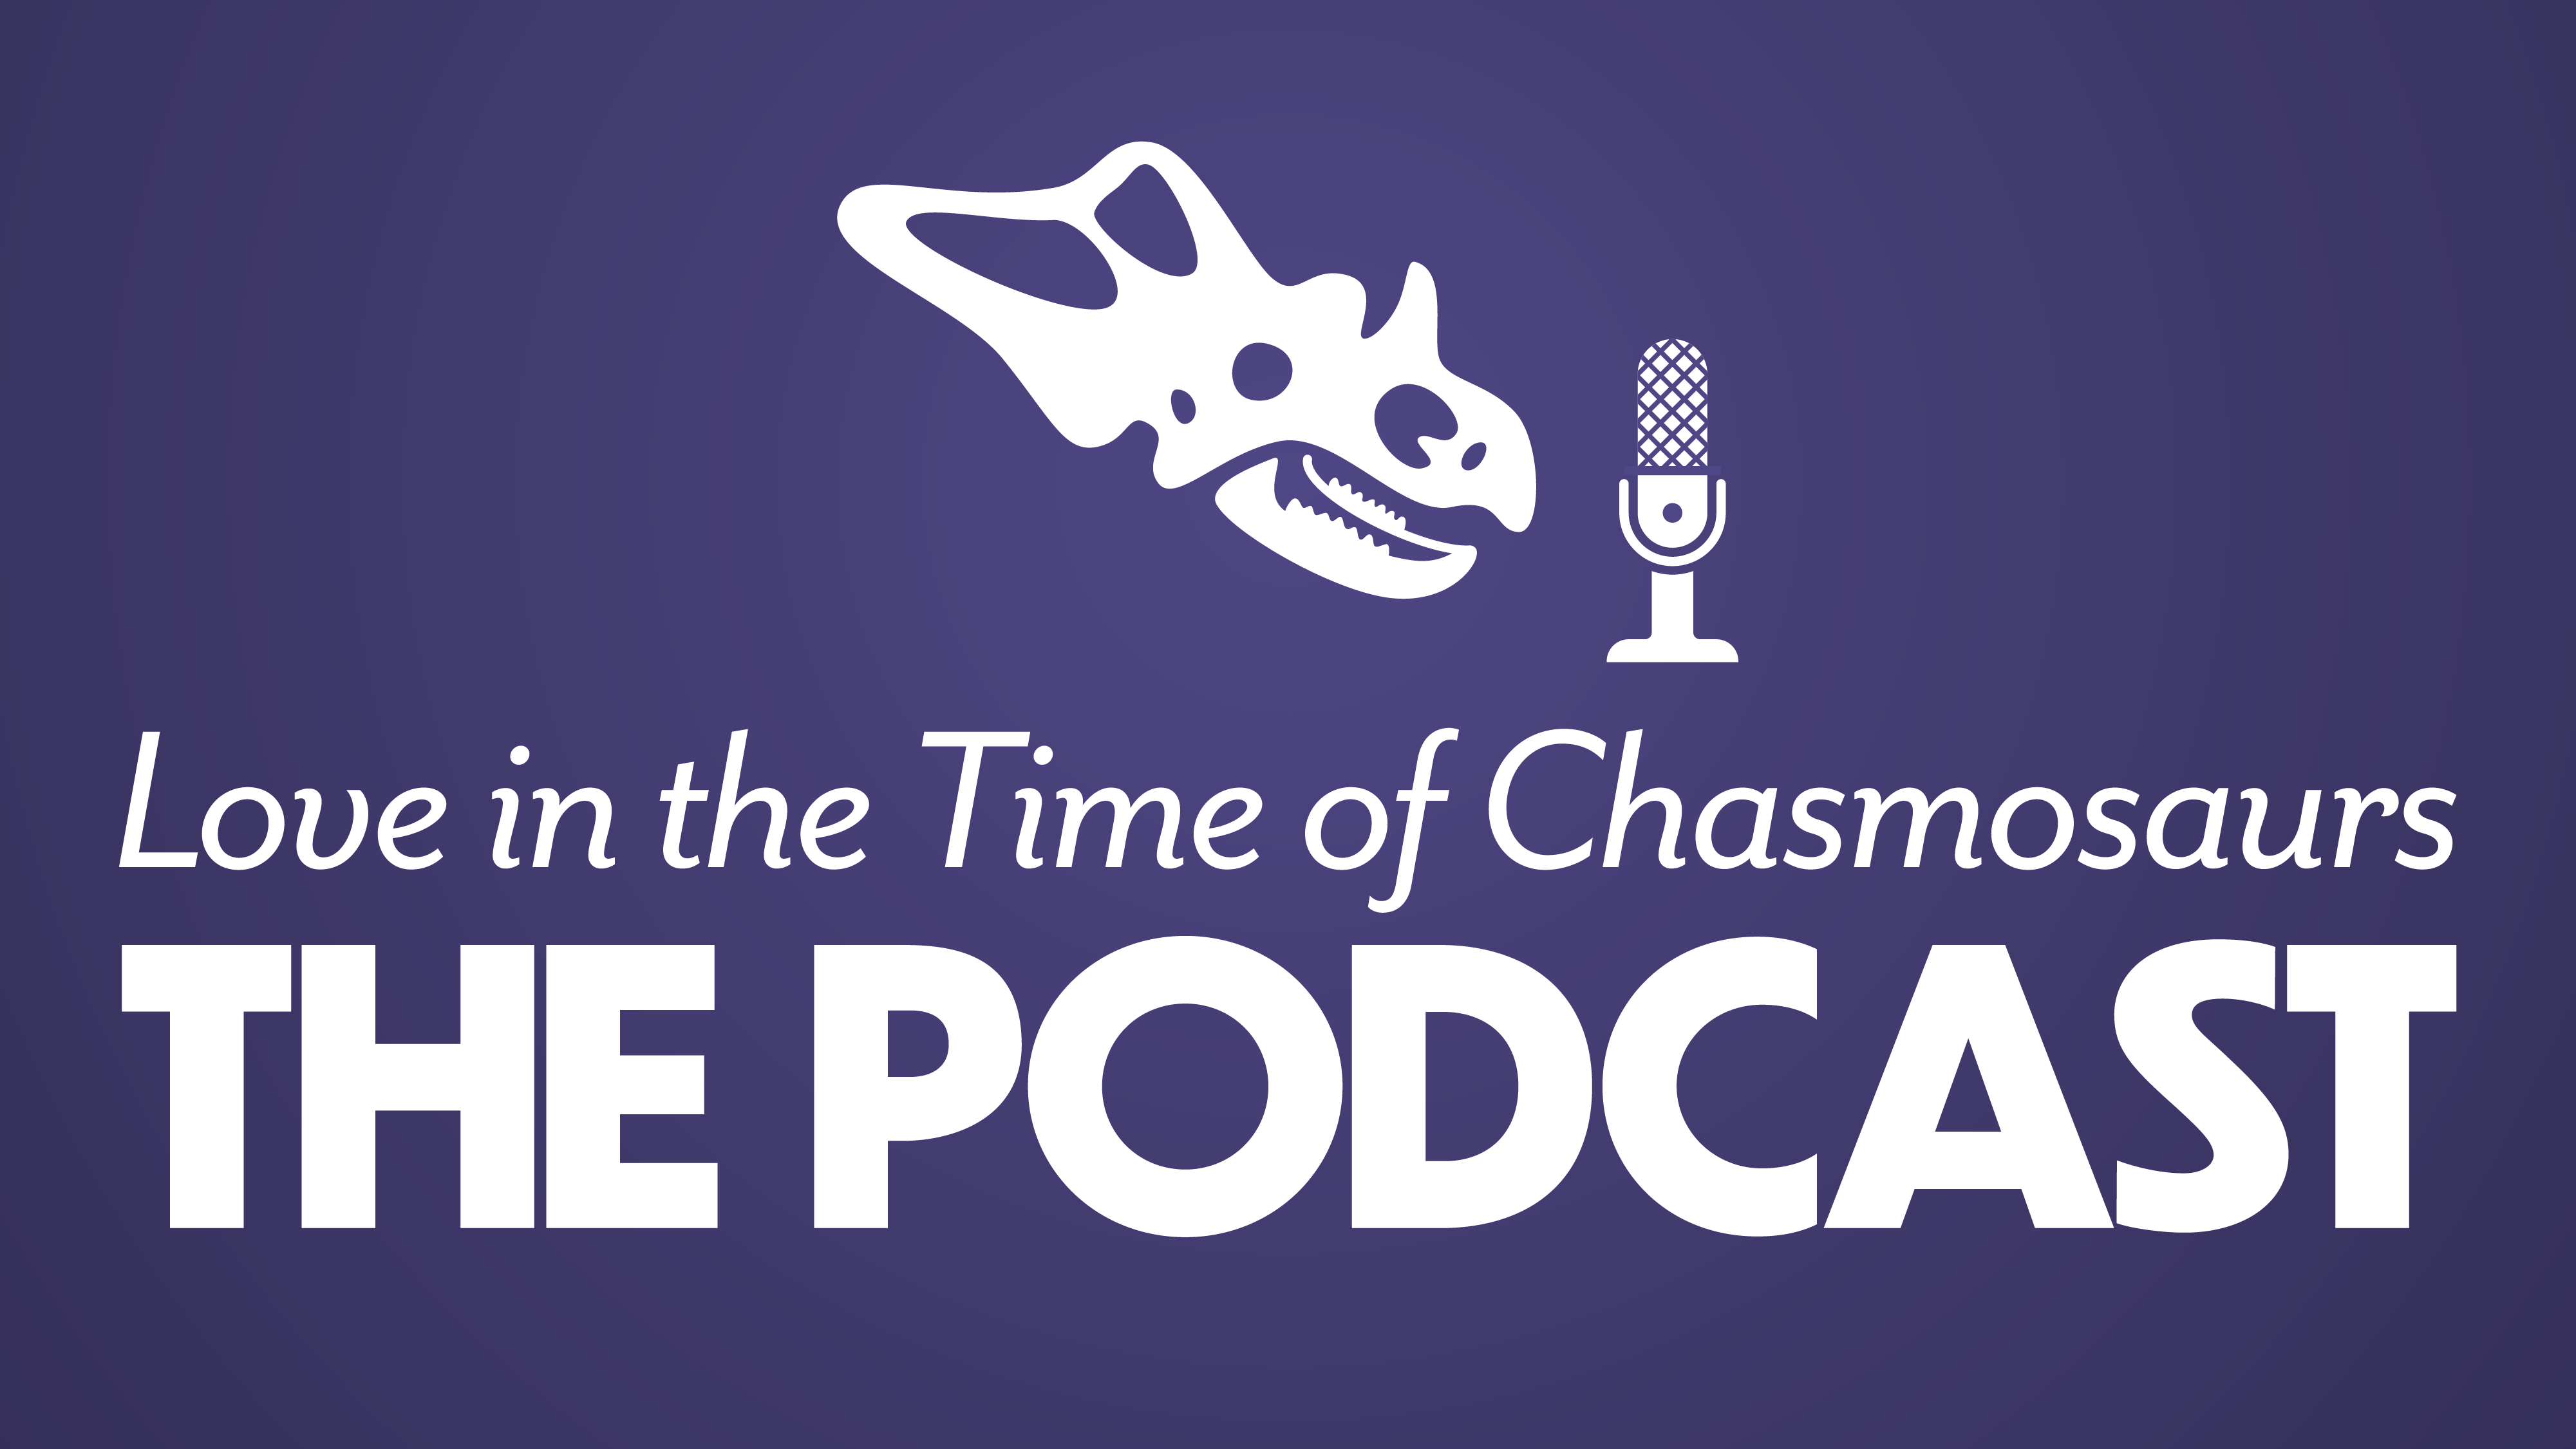 Love in the Time of Chasmosaurs: The Podcast promotional graphic featuring a chasmosaurus skull with a microphone